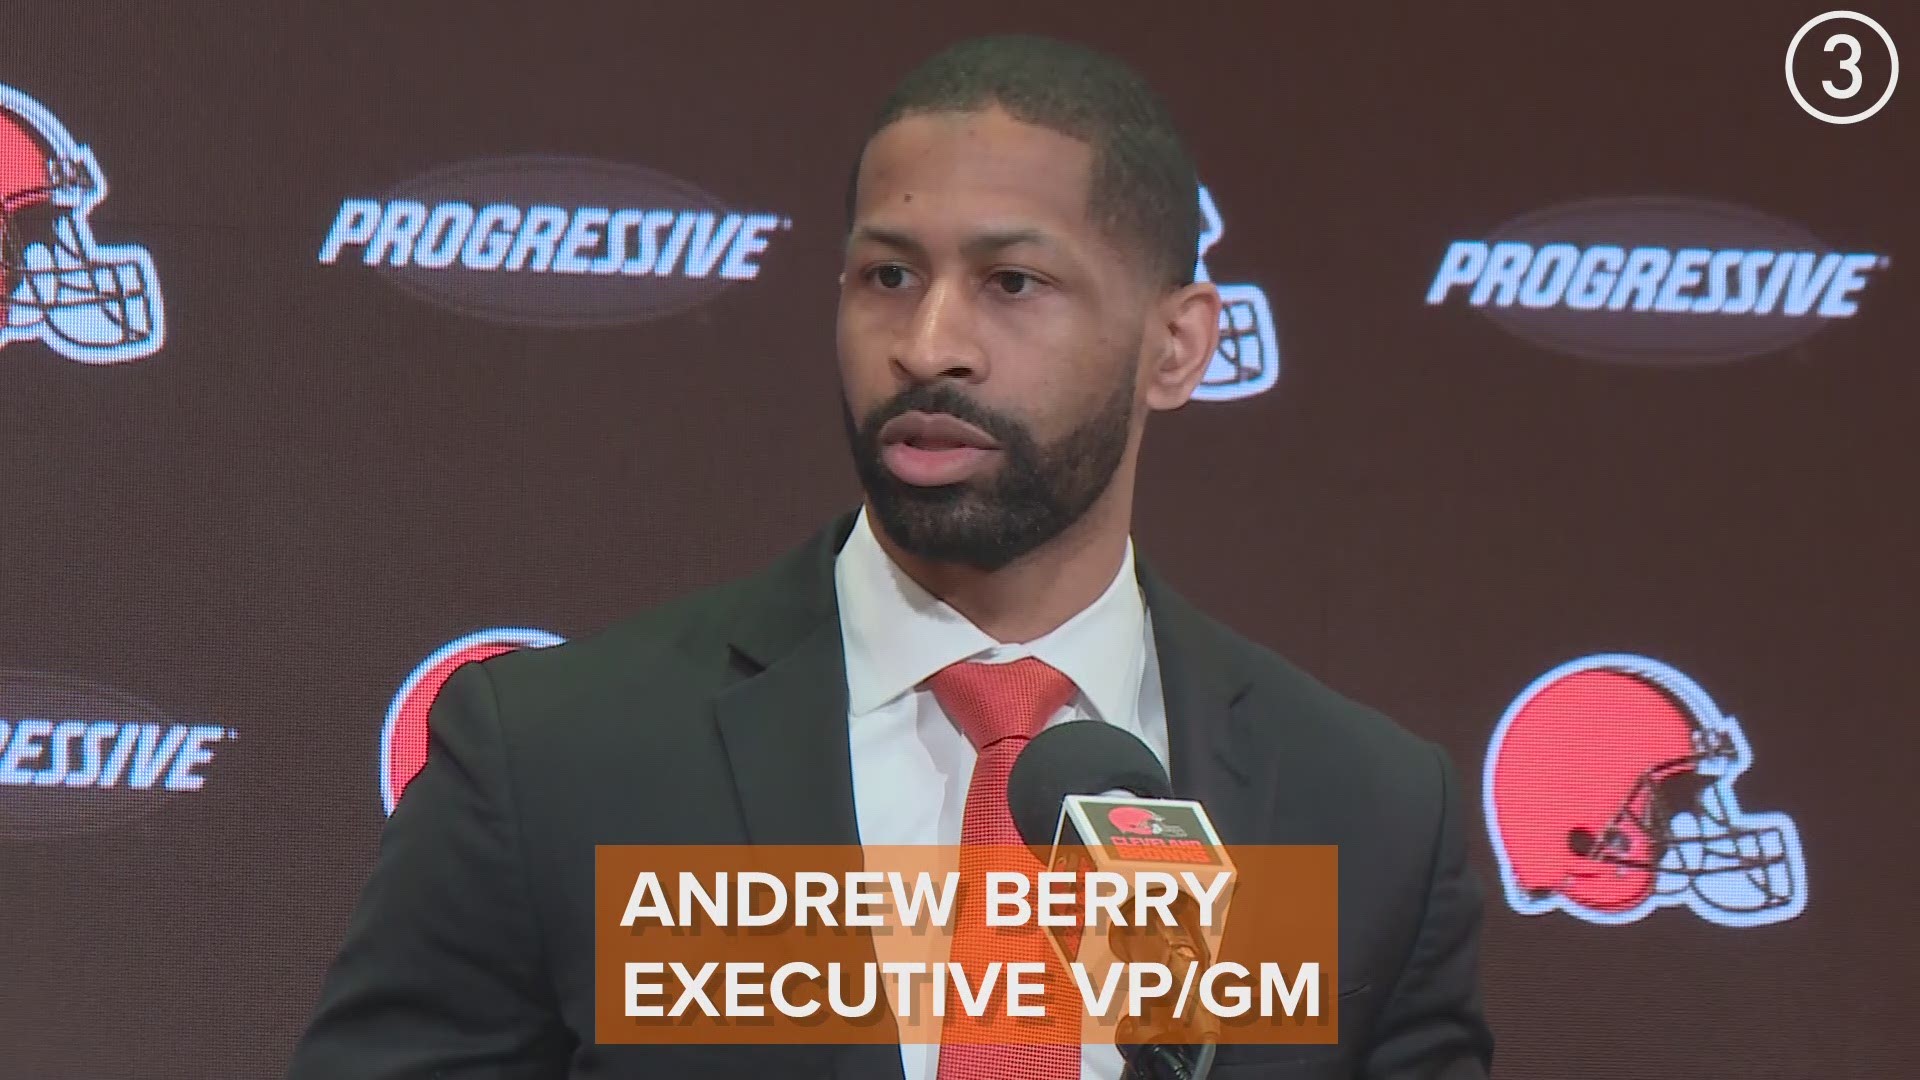 The Browns have shown a lot of faith in making 32-year-old Andrew Berry the youngest GM in league history. He was the VP of player personnel (2016-2018) with Browns.